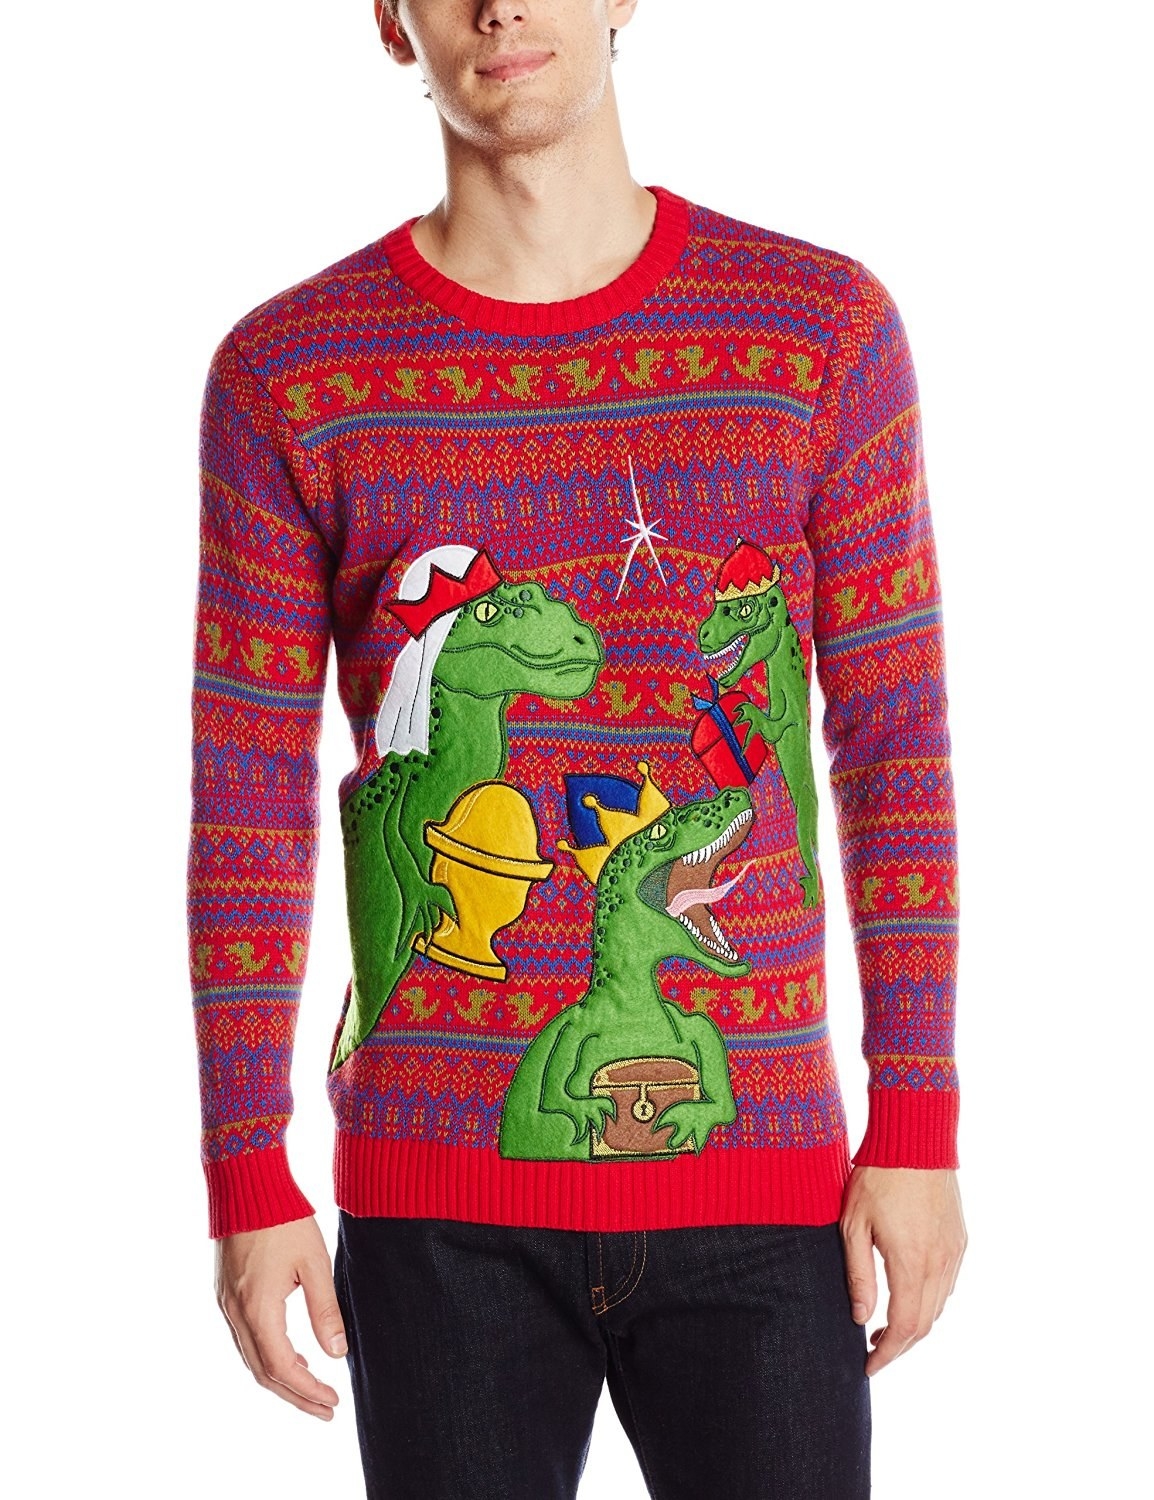 26 Of The Best Ugly Christmas Sweaters You Can Get On Amazon